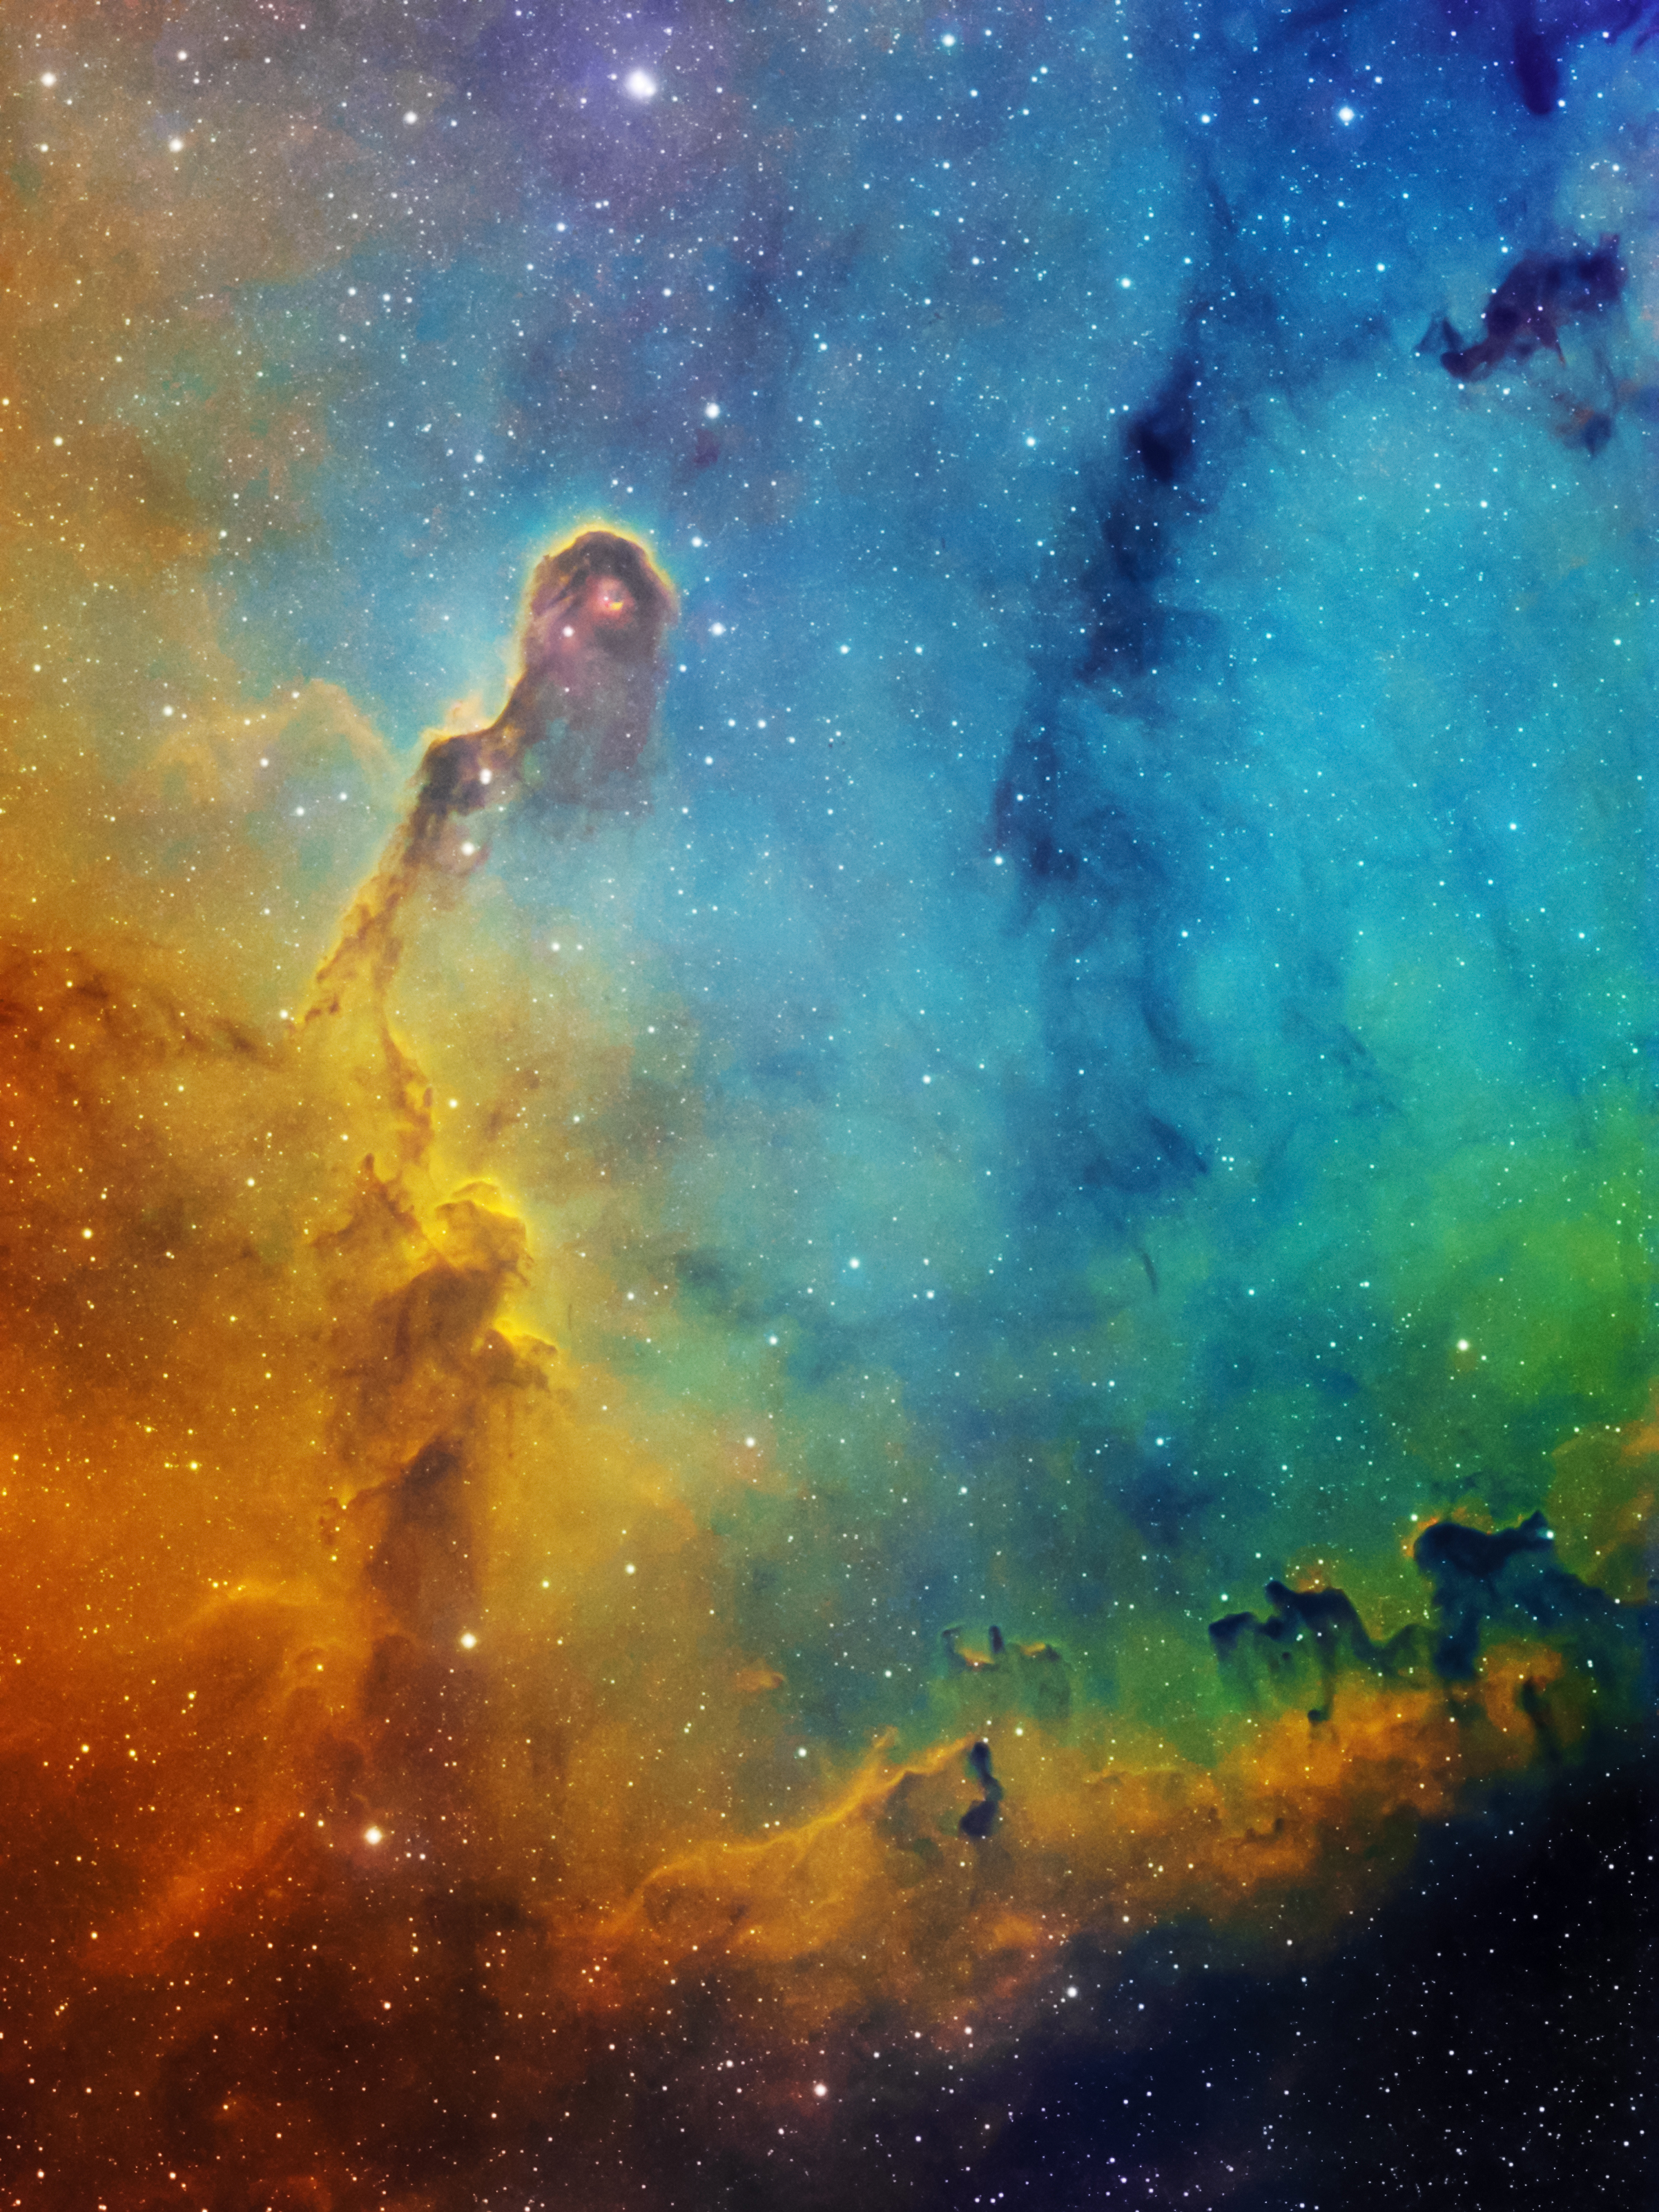 The Elephant's Trunk Nebula (IC 1396) in the constellation Cepheus, HST image